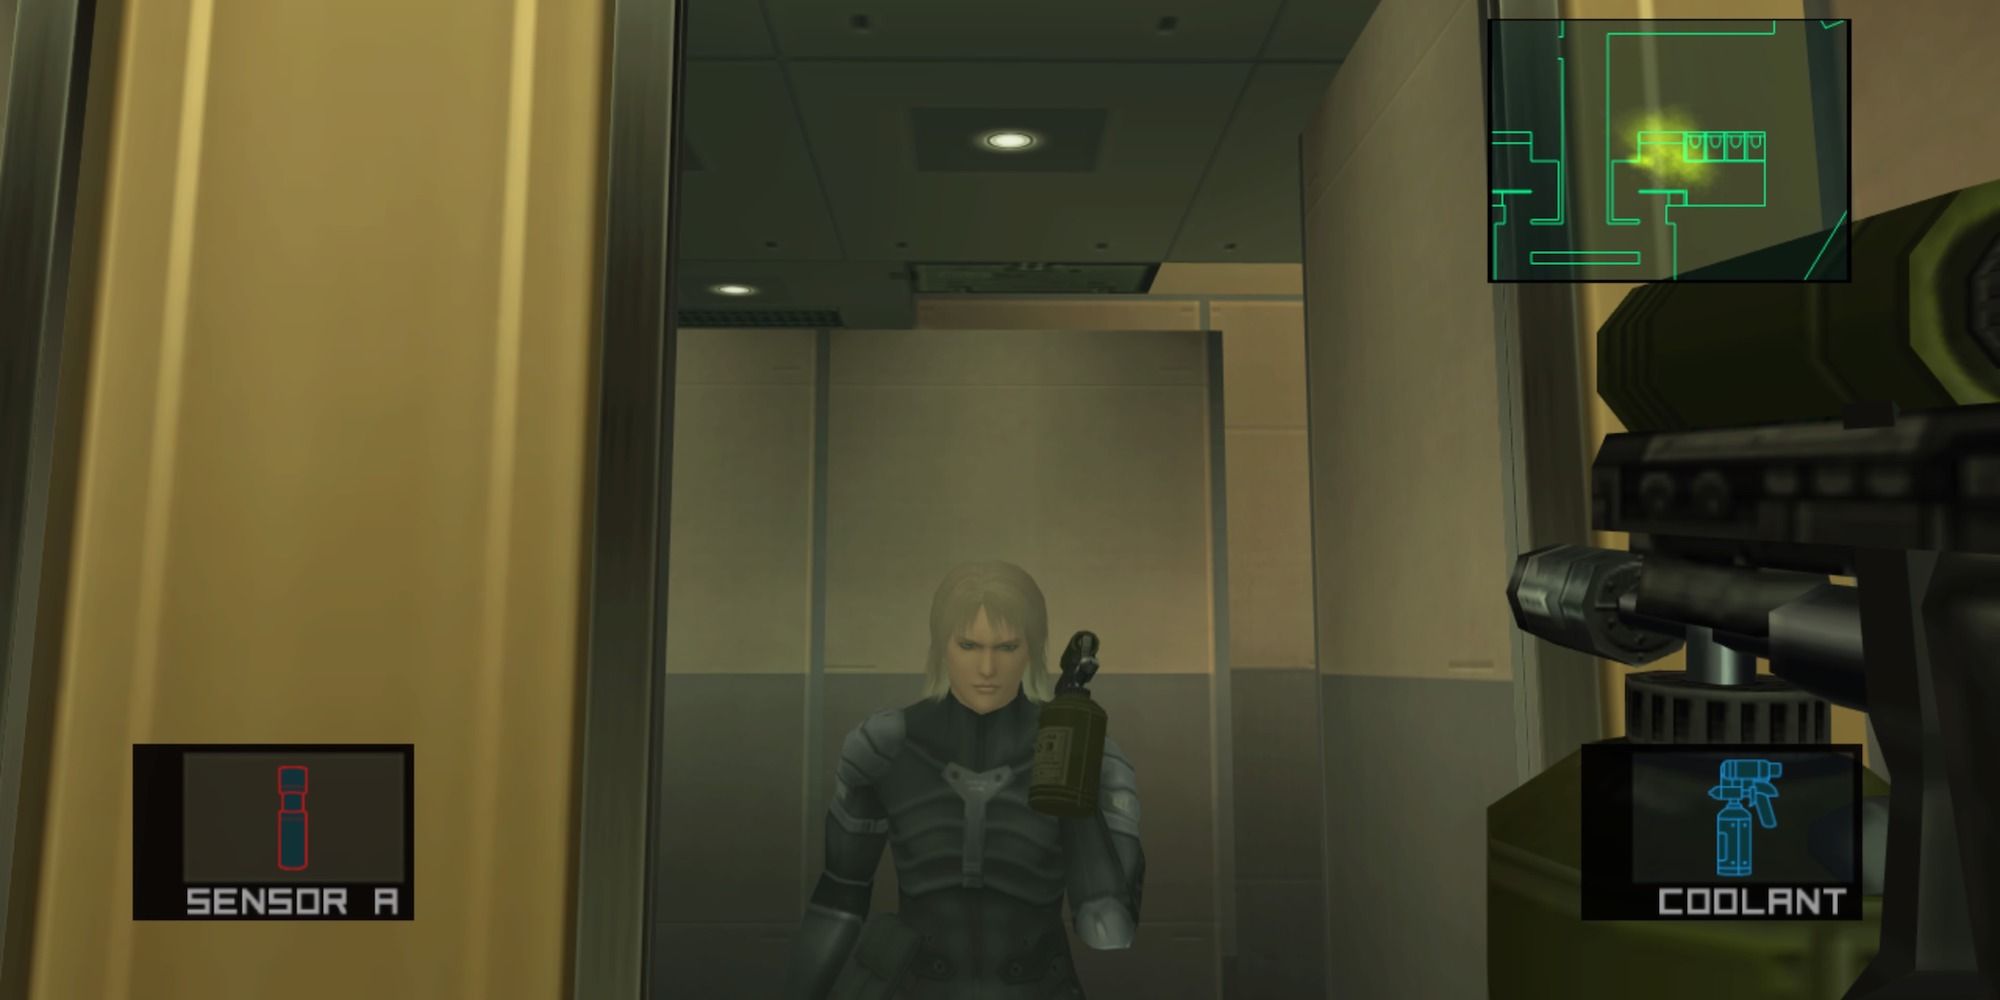 Raiden looking in the mirror with the coolant spray